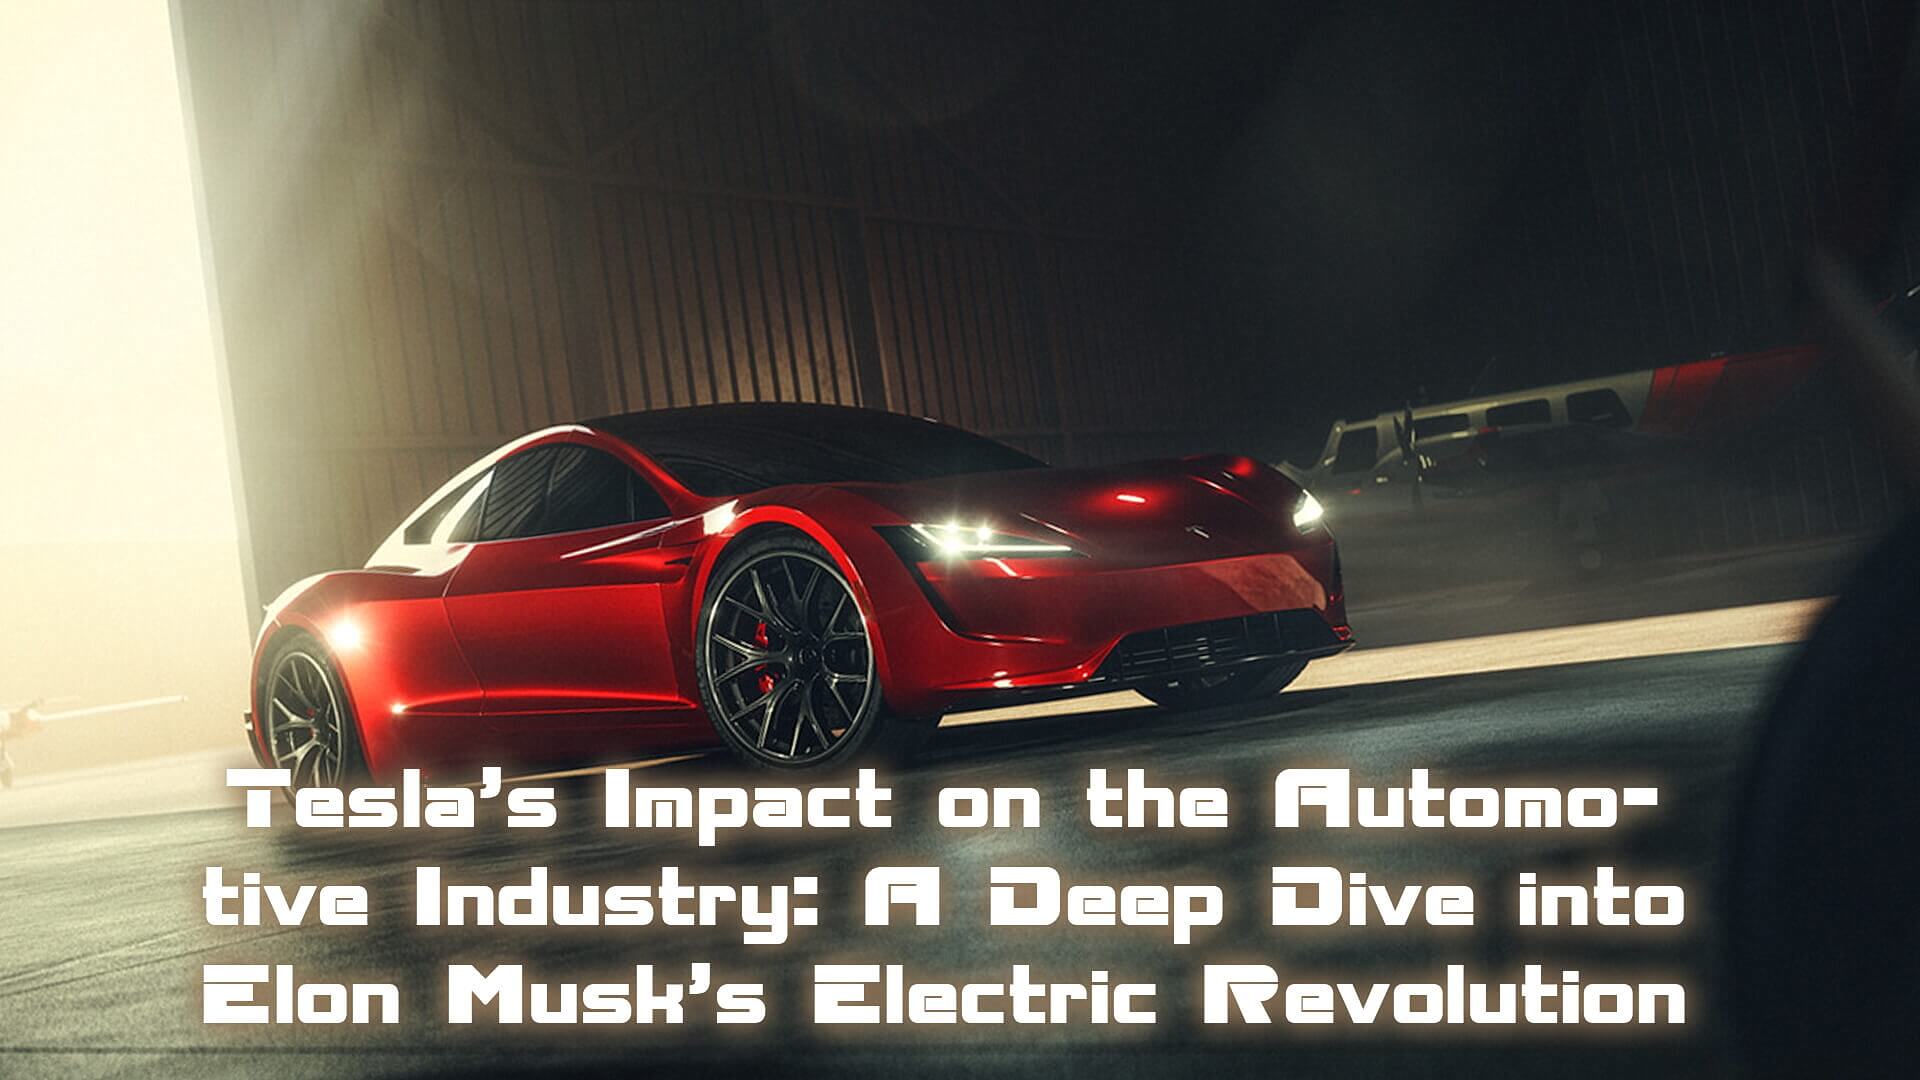 Tesla’s Impact on the Automotive Industry: A Deep Dive into Elon Musk’s Electric Revolution